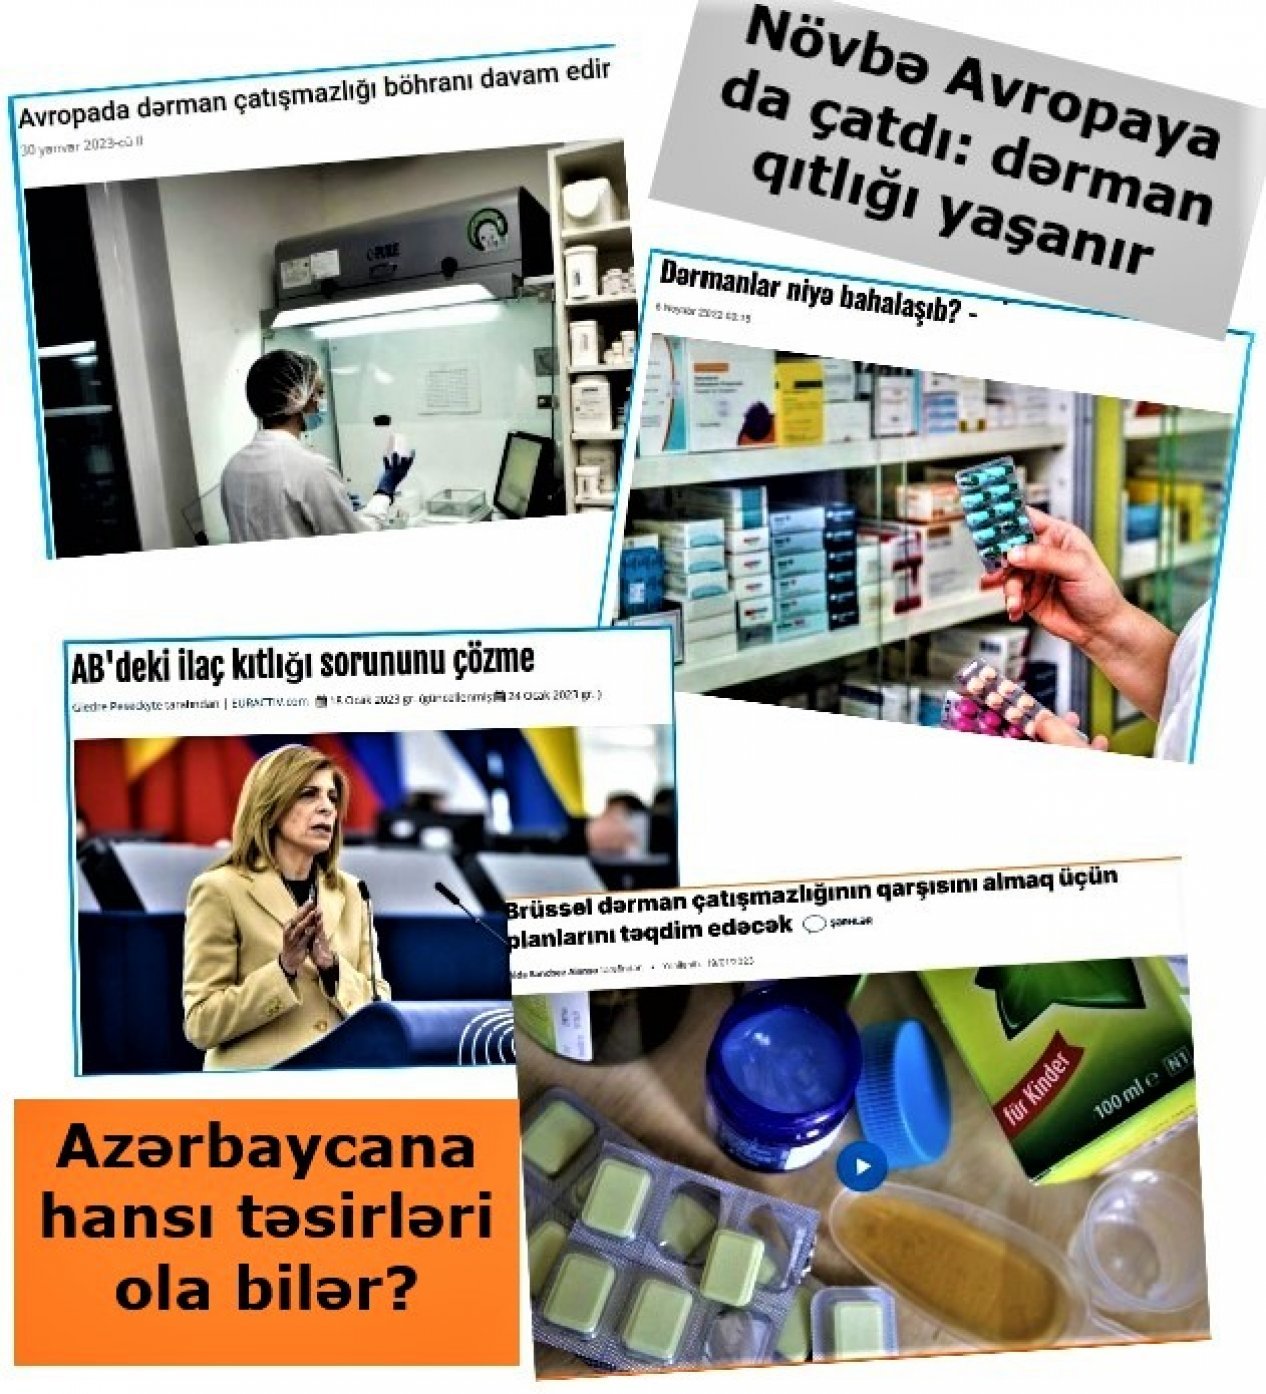 Drug shortage in Europe. How can it affect Azerbaijan?